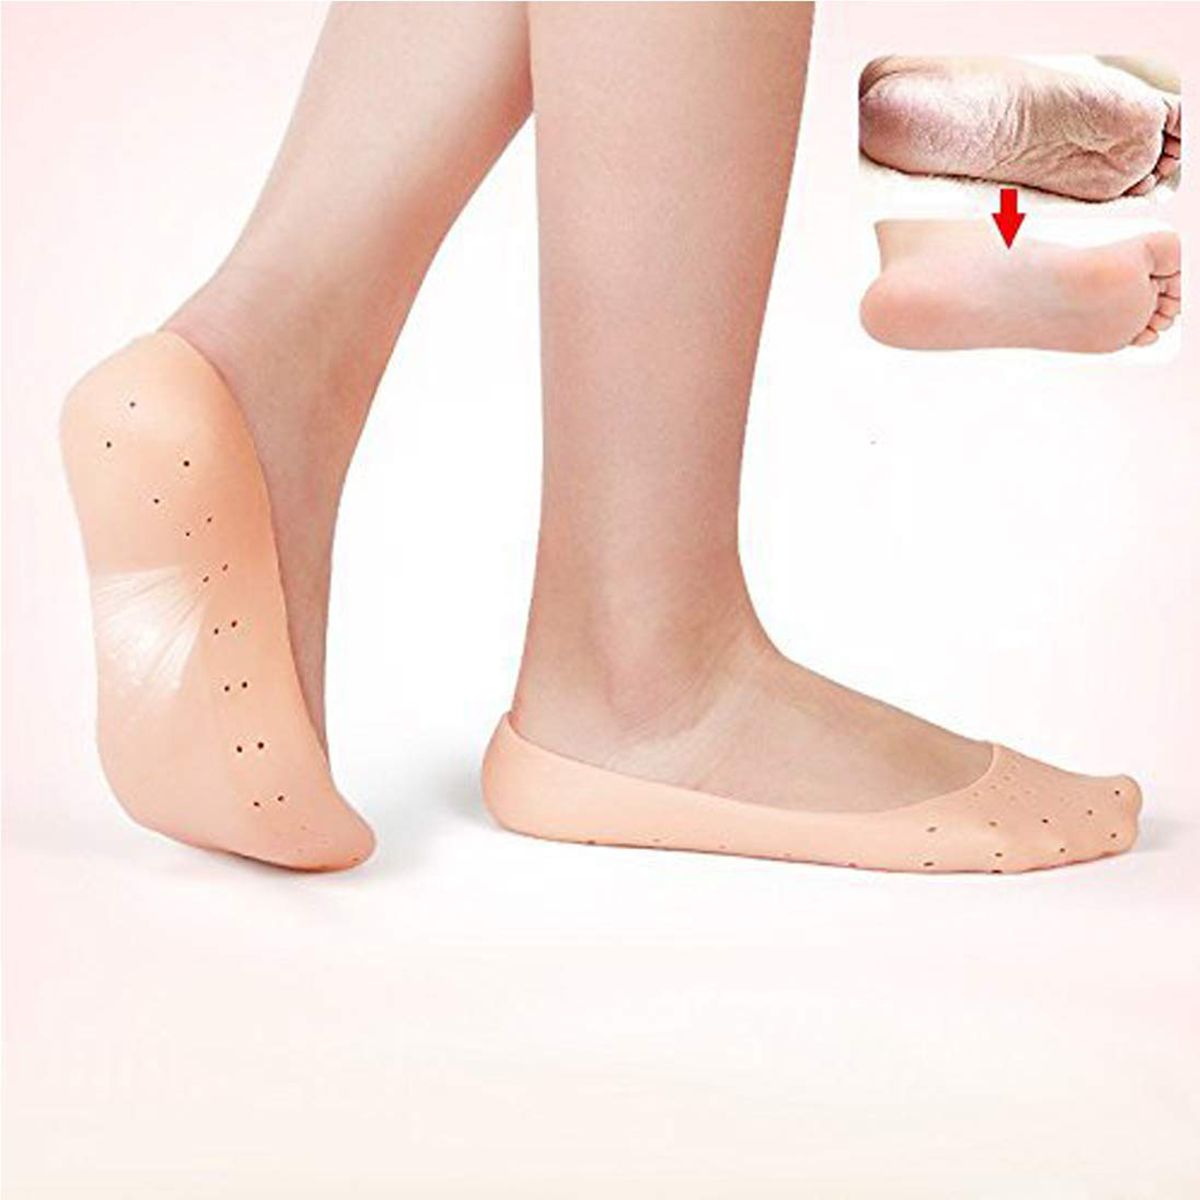 Anti Crack Silicone Full Socks for Foot-care and Heel Cracks